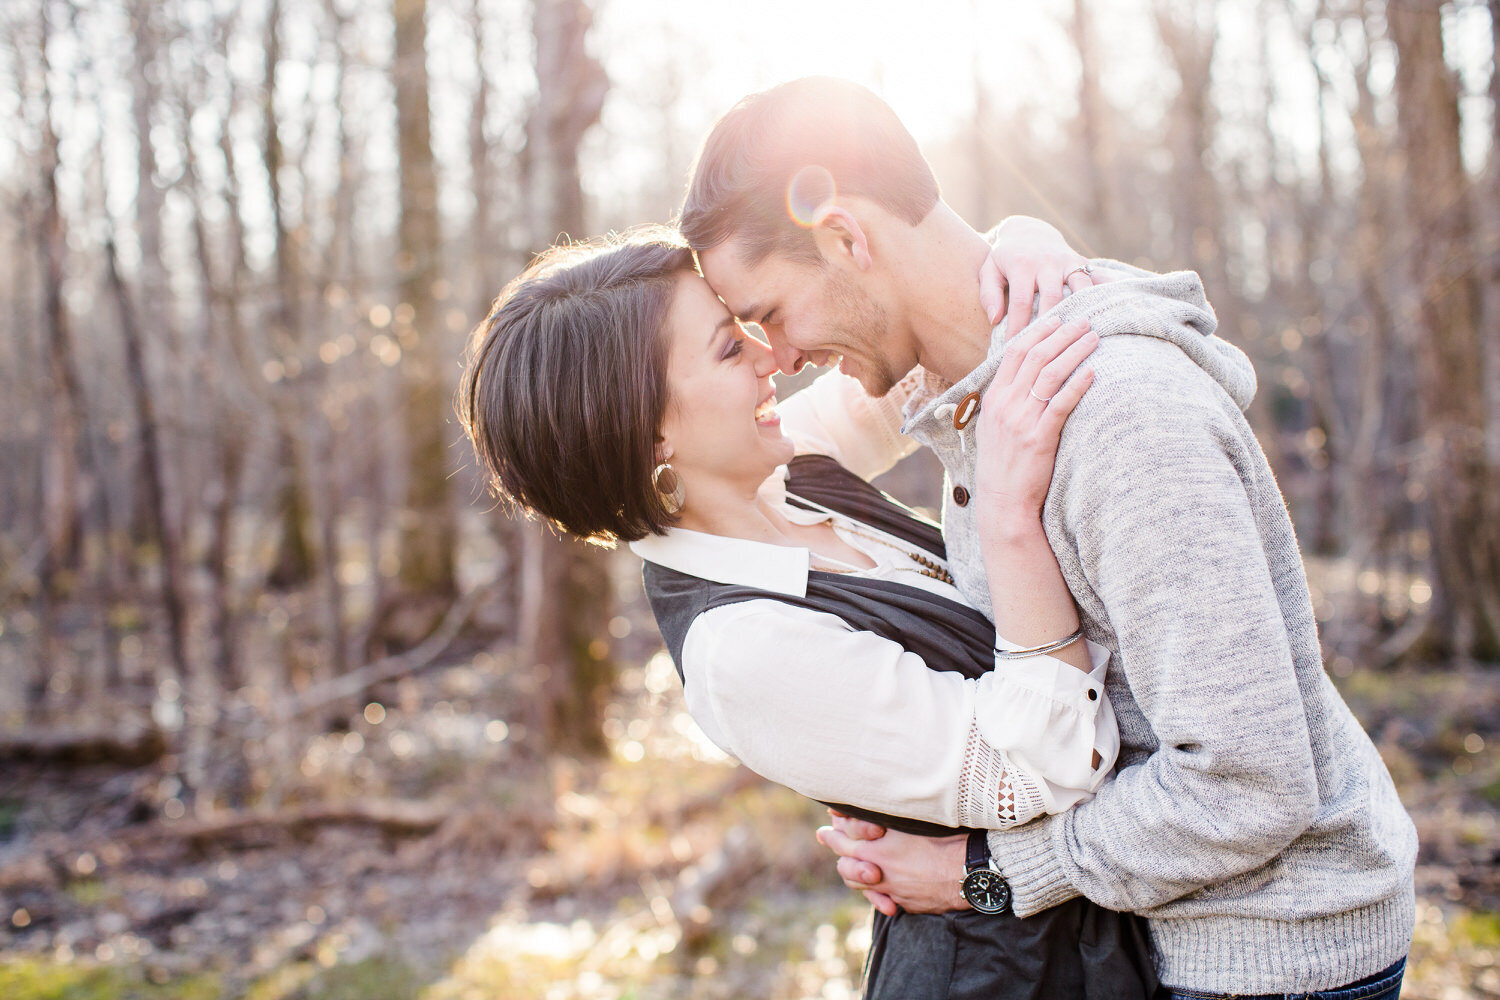 clairedianaphotography-atlanta-athens-engagement-photos-log-cabin-woods-fire-watson-mill-68